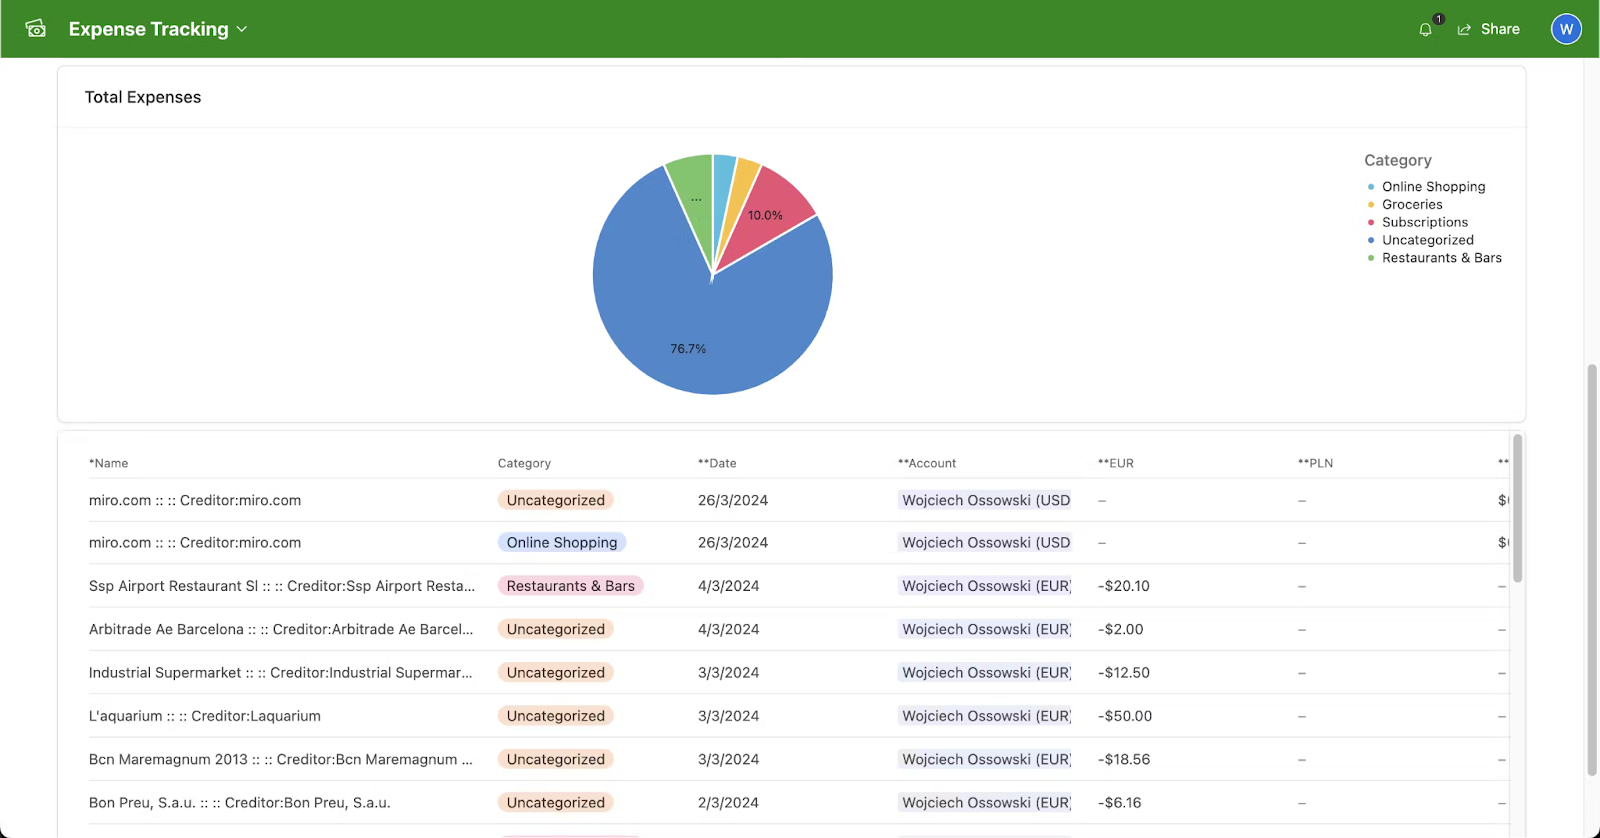 Screenshot of an expense tracking report in a no-code platform Airtable showing a pie chart of total expenses by category alongside a detailed transaction list.